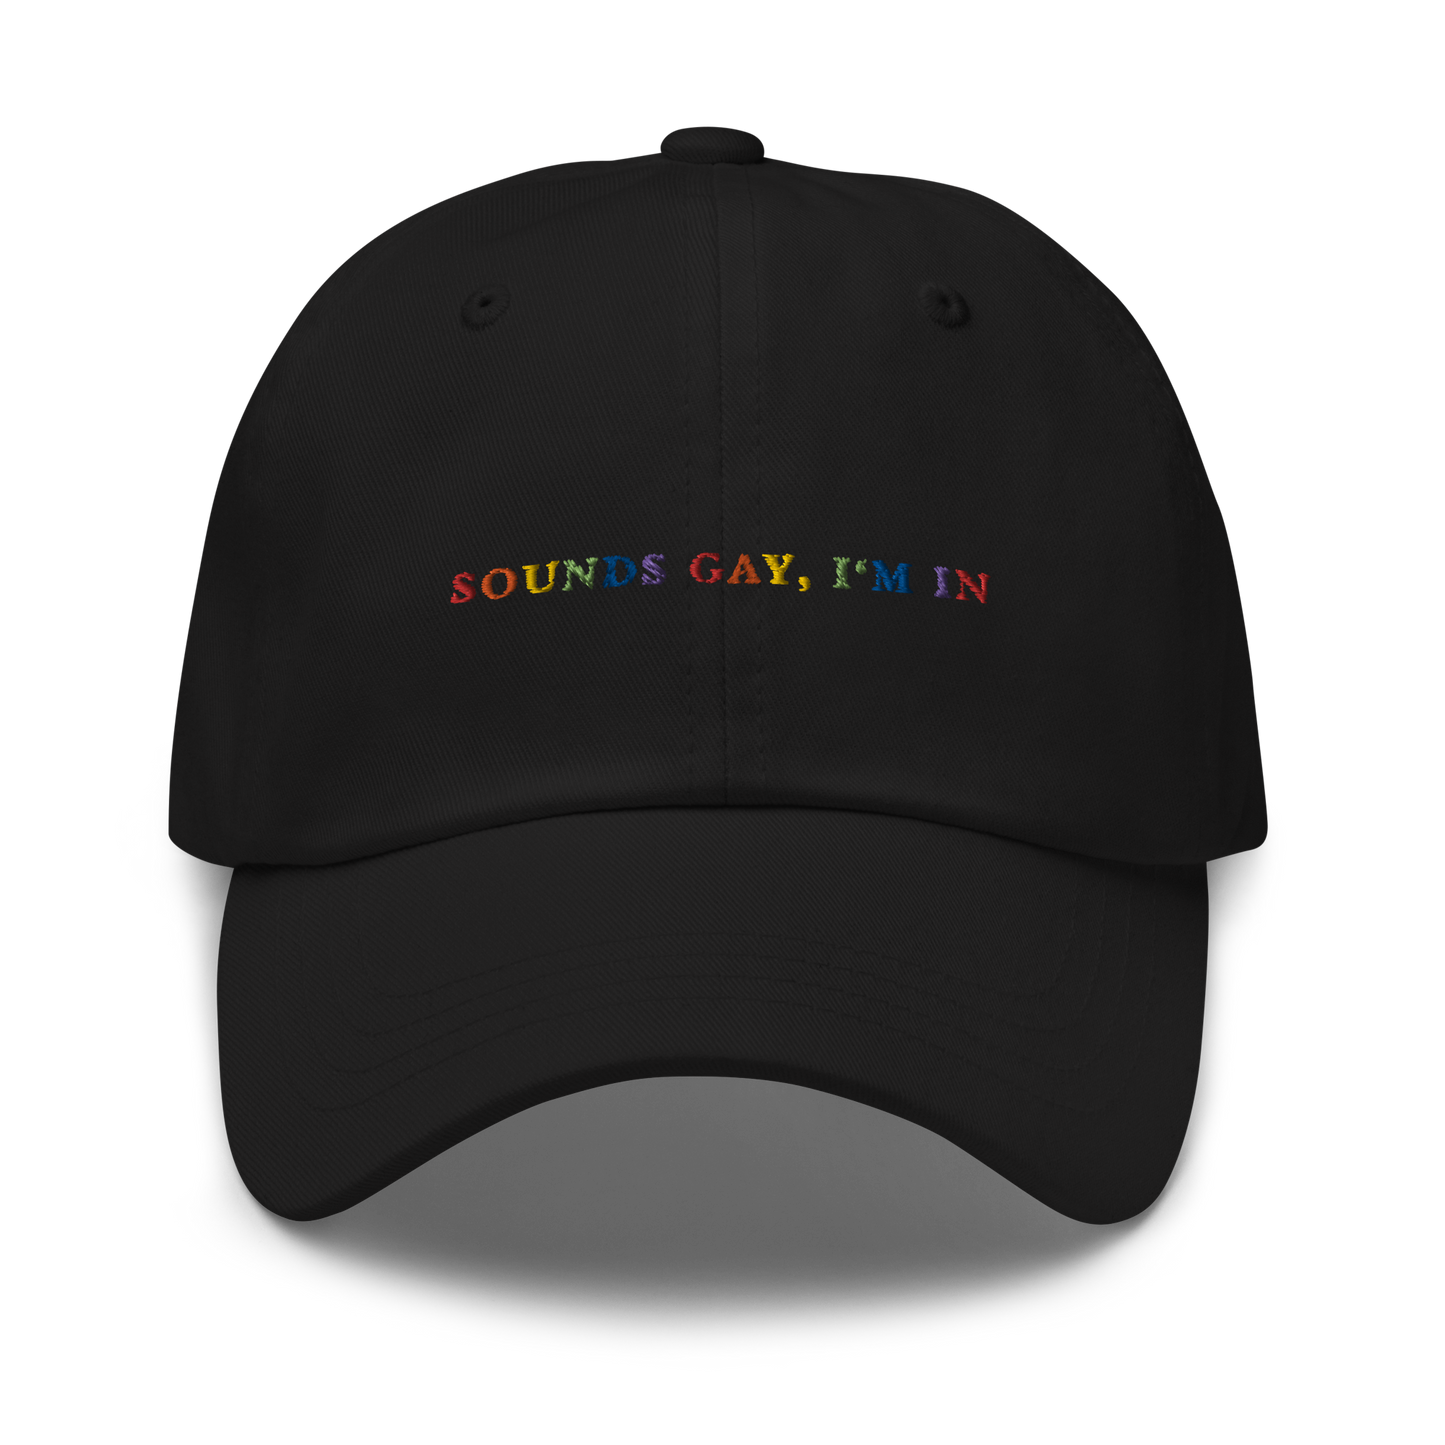 Sounds Gay, I'm In Pride Embroidered Dad Hat